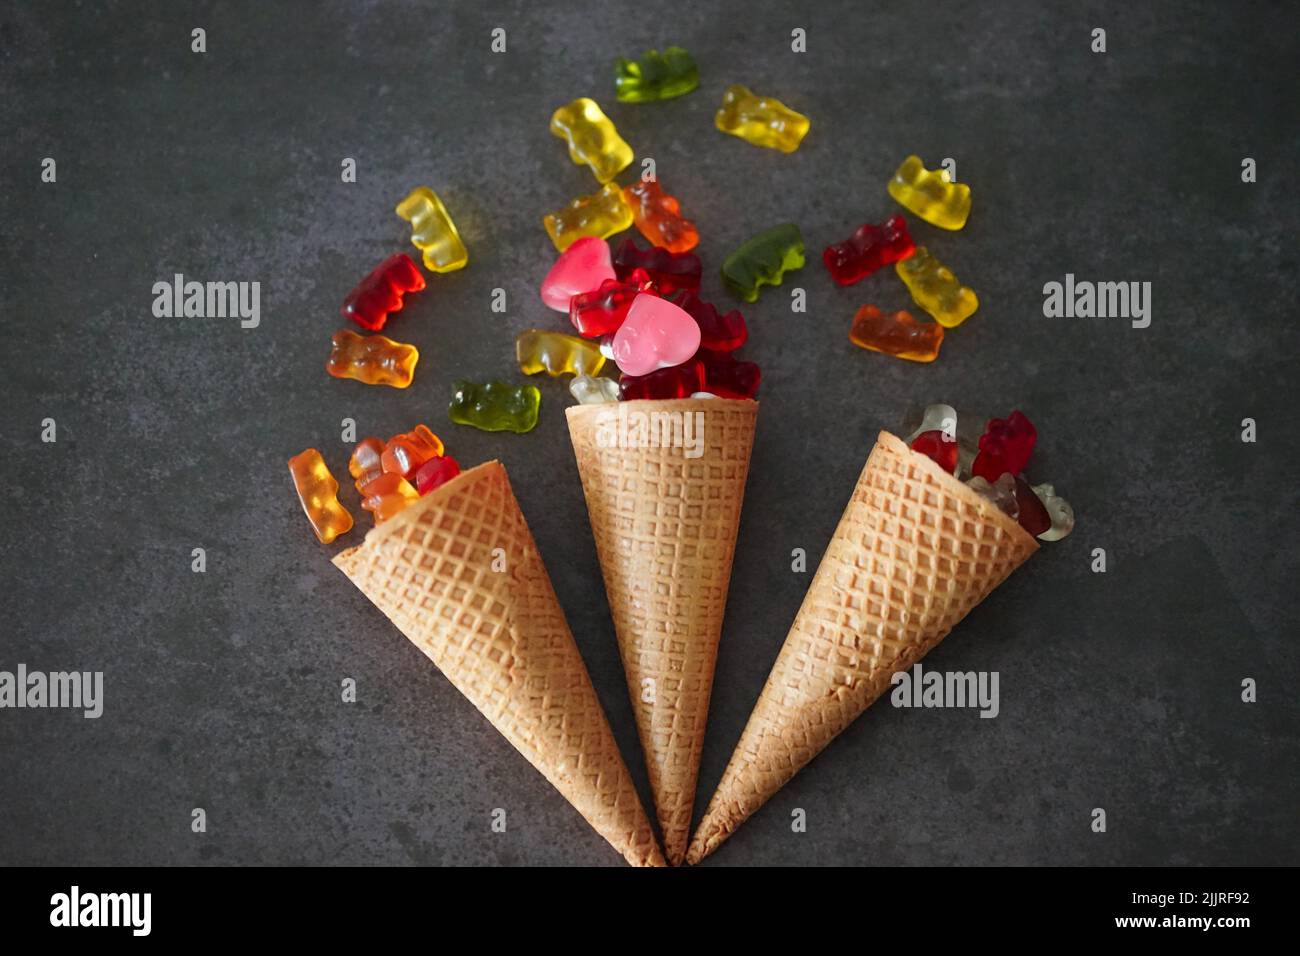 A closeup of three ice cream cones with gummy bears on the dark surface Stock Photo